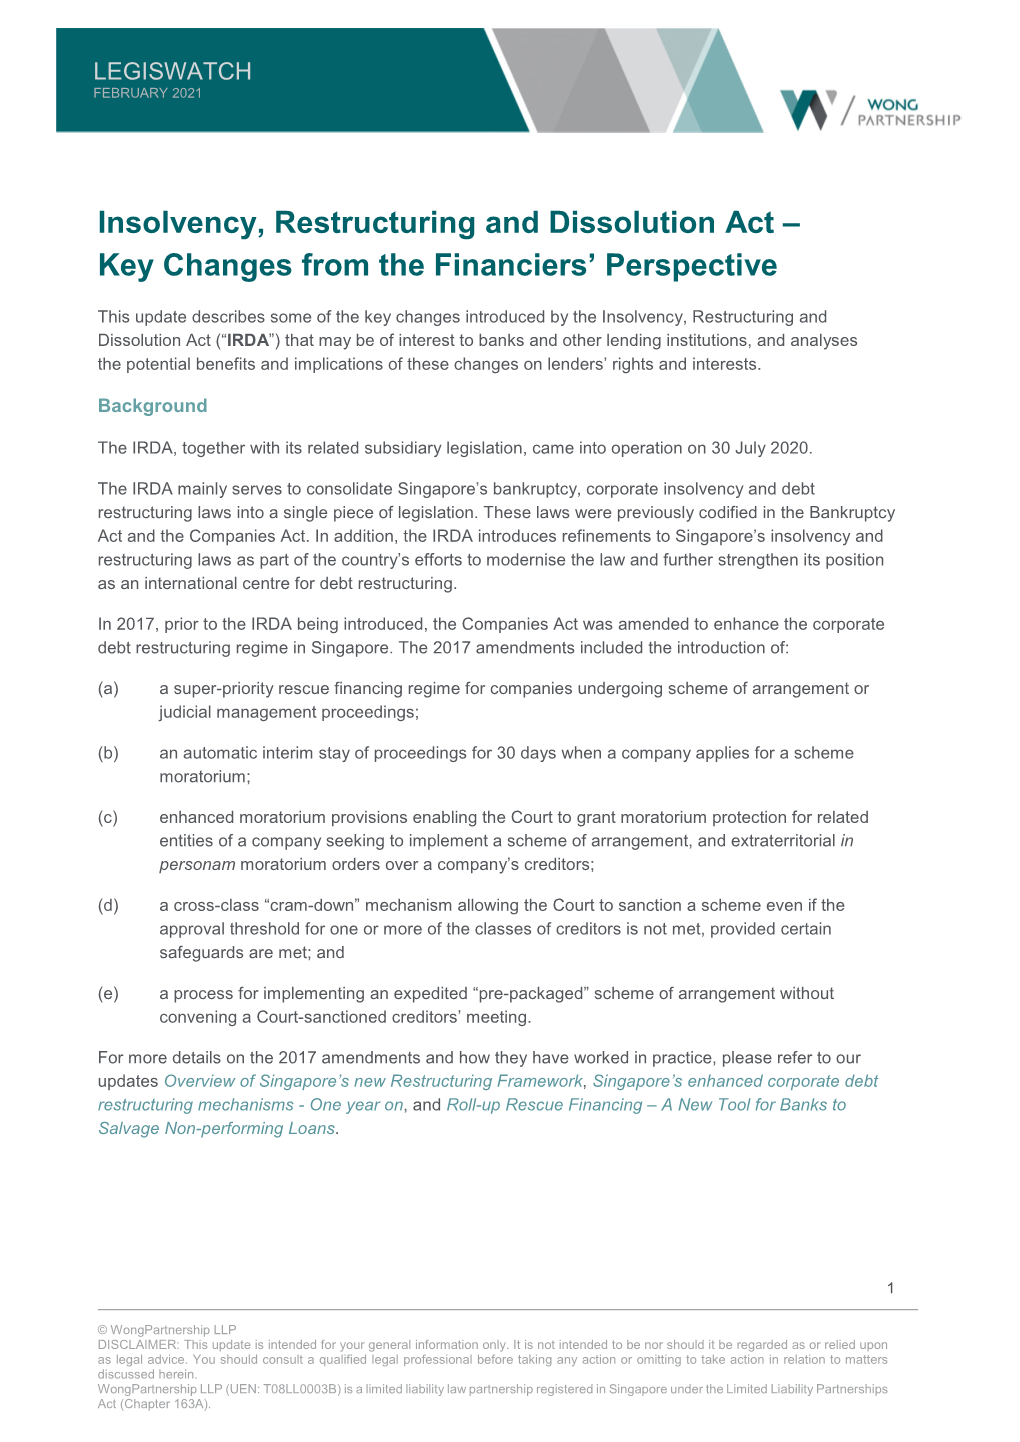 Insolvency, Restructuring and Dissolution Act – Key Changes from the Financiers’ Perspective